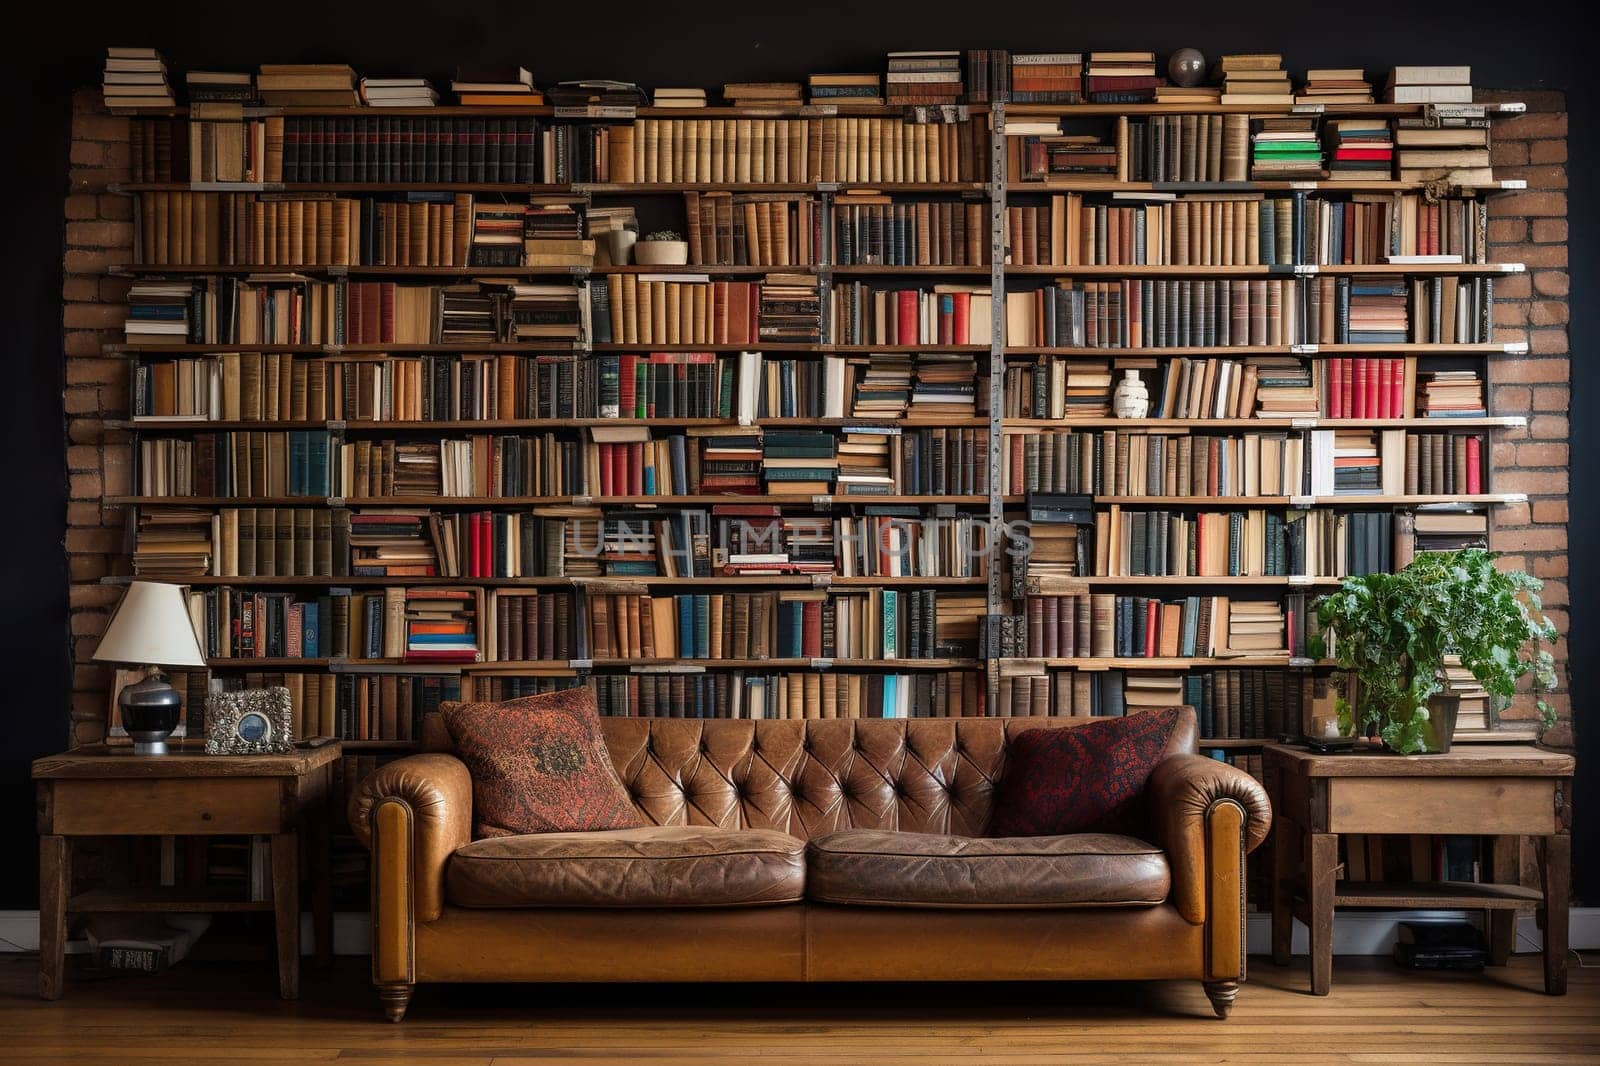 A wall with overflowing bookshelves up to the ceiling, a sofa next to the bookshelves.